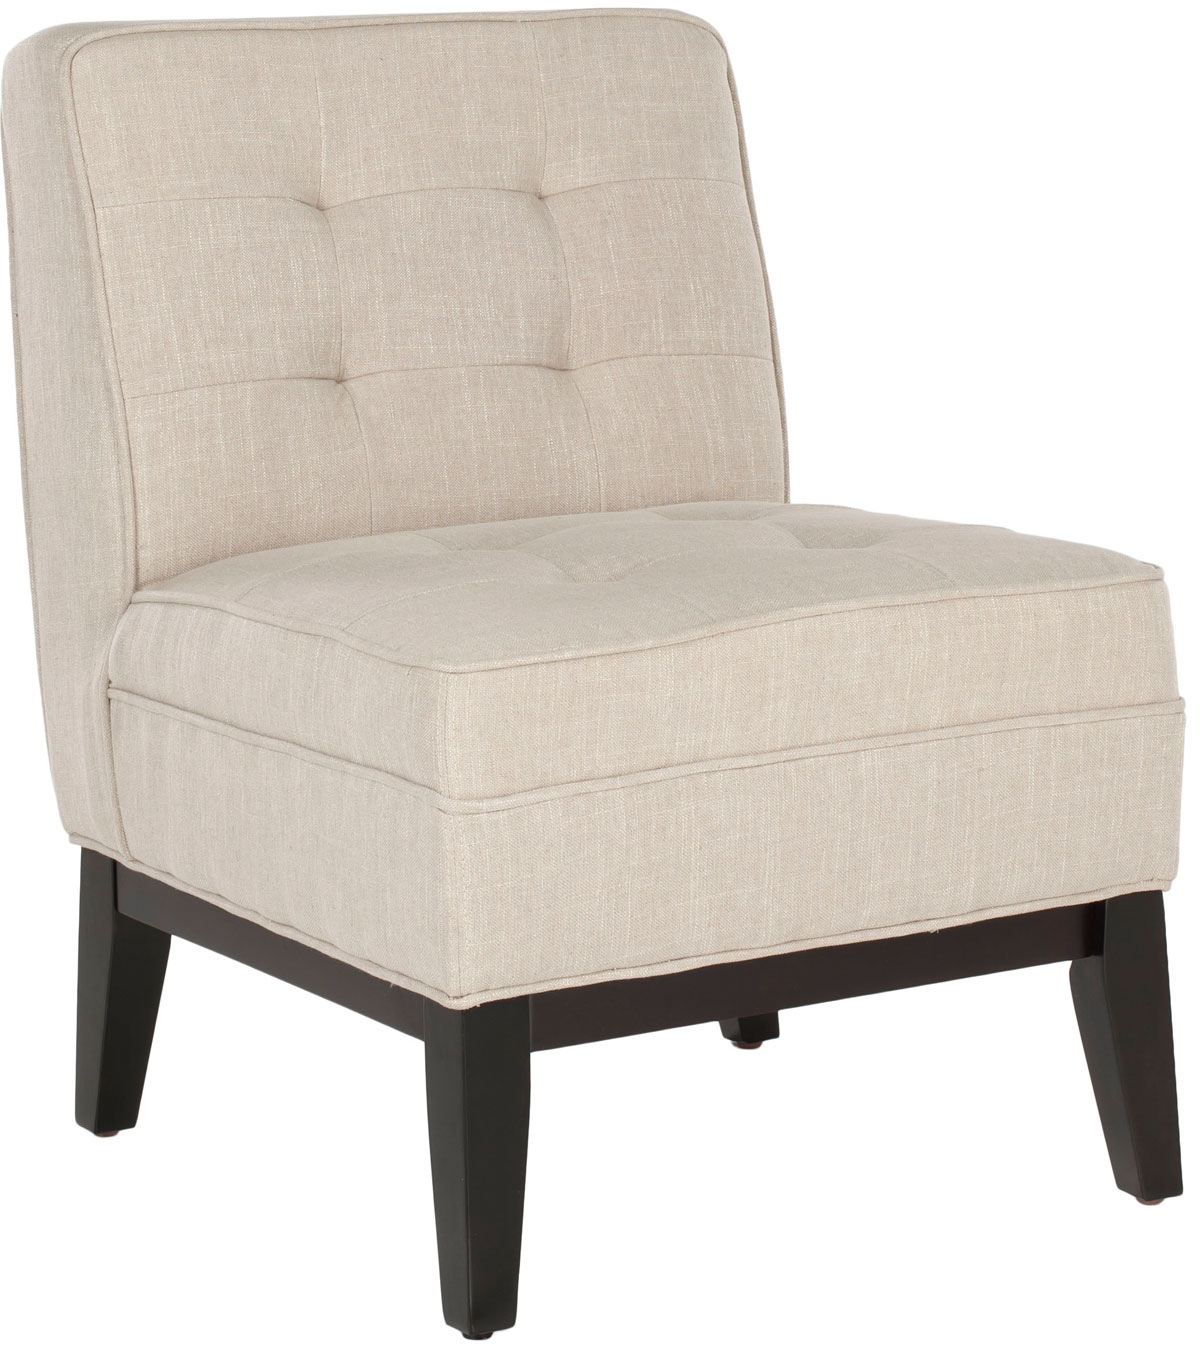 Angel Tufted Armless Club Chair - Off White - Arlo Home - Image 2